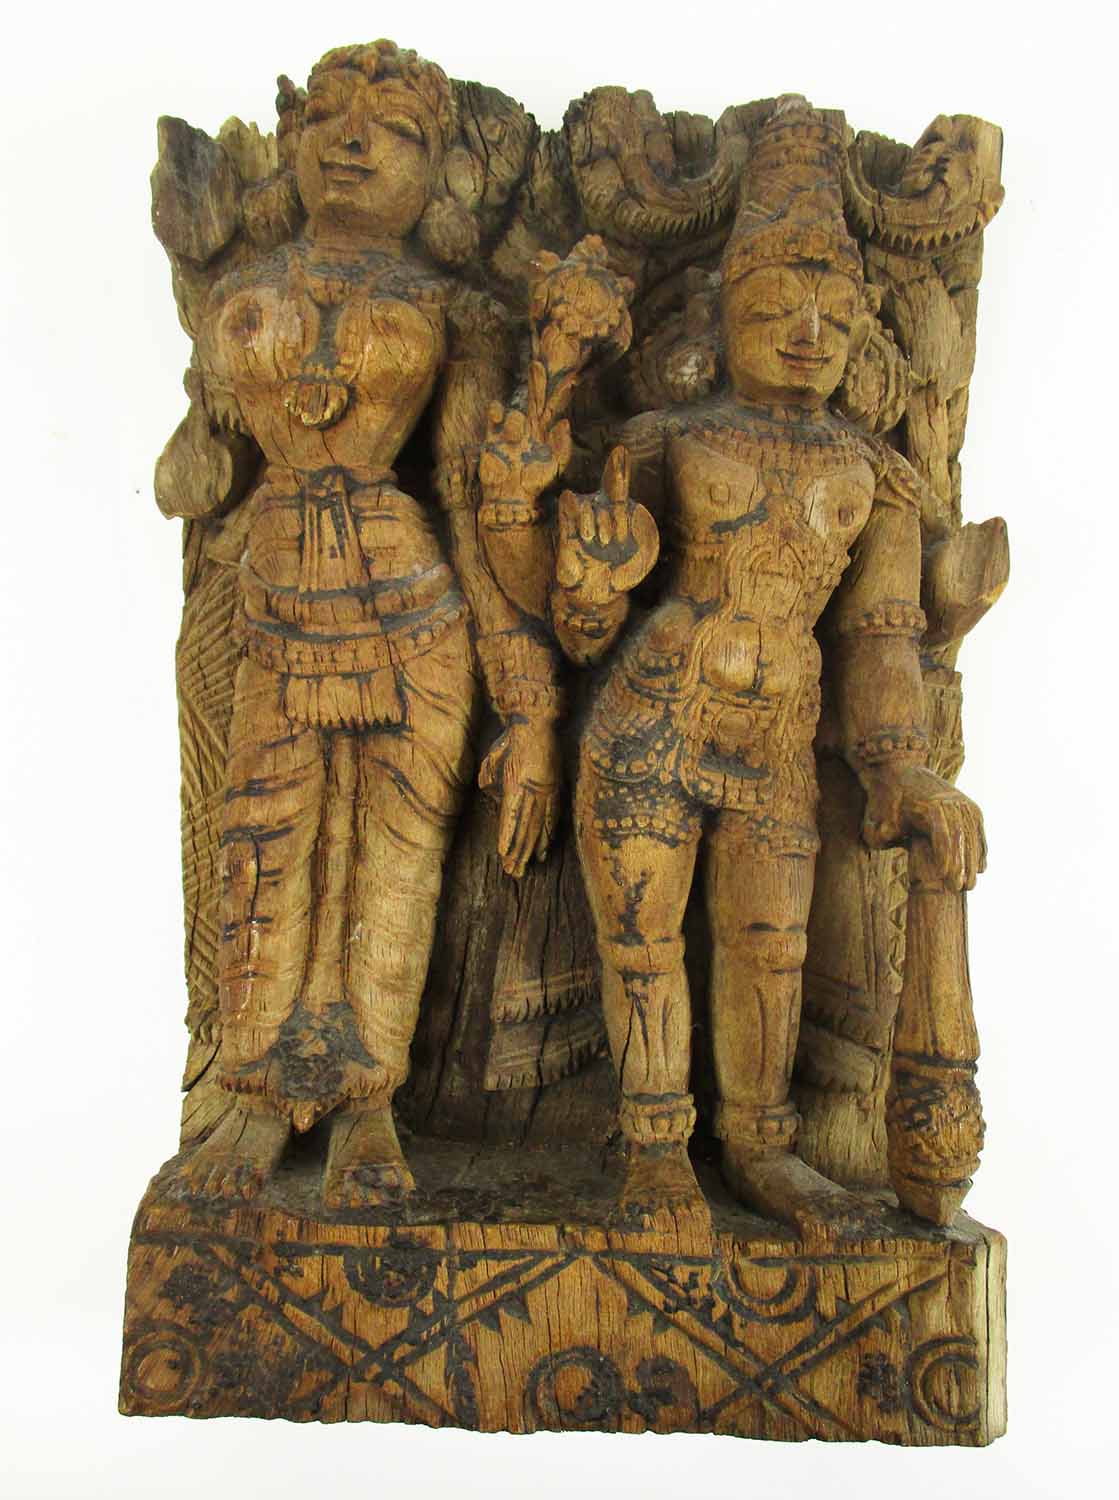 THREE INDIAN WOOD CARVINGS, 19th century and later, Mysore, variously depicting Ganesh, - Image 4 of 7